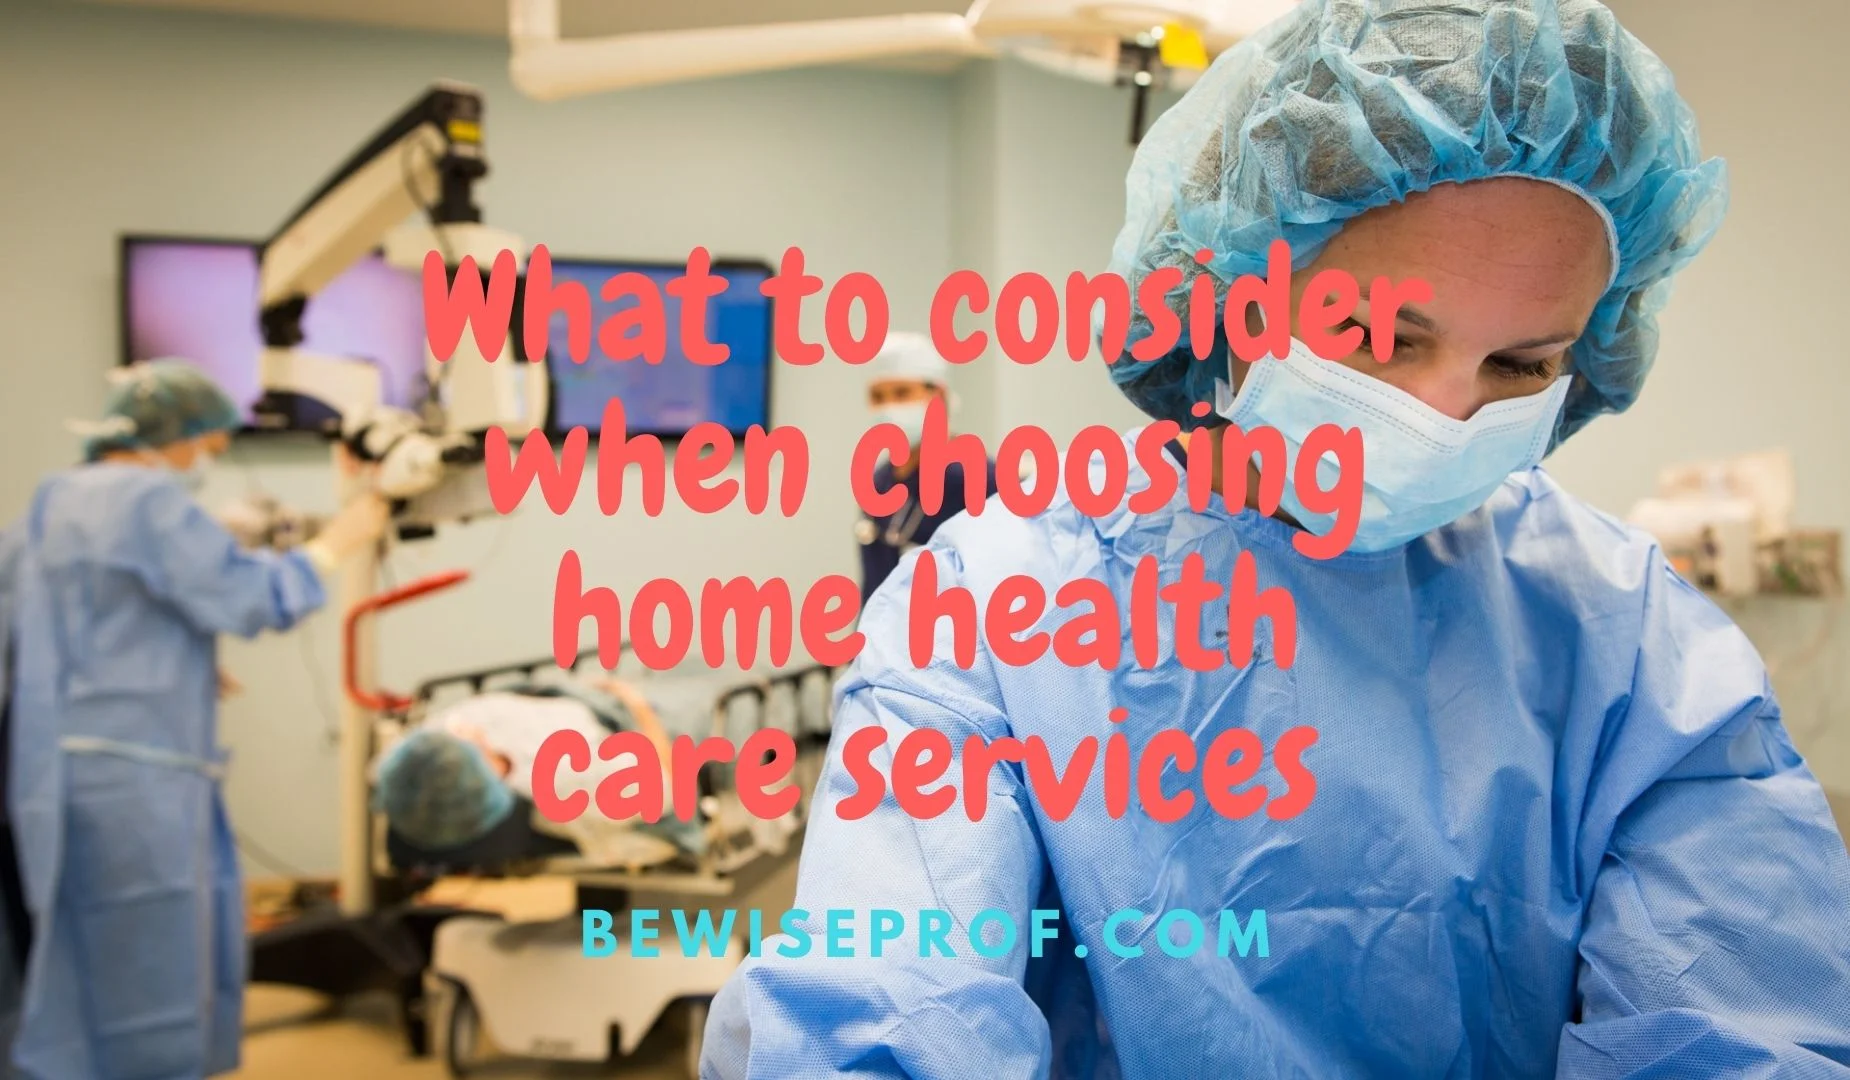 What to consider when choosing home health care services